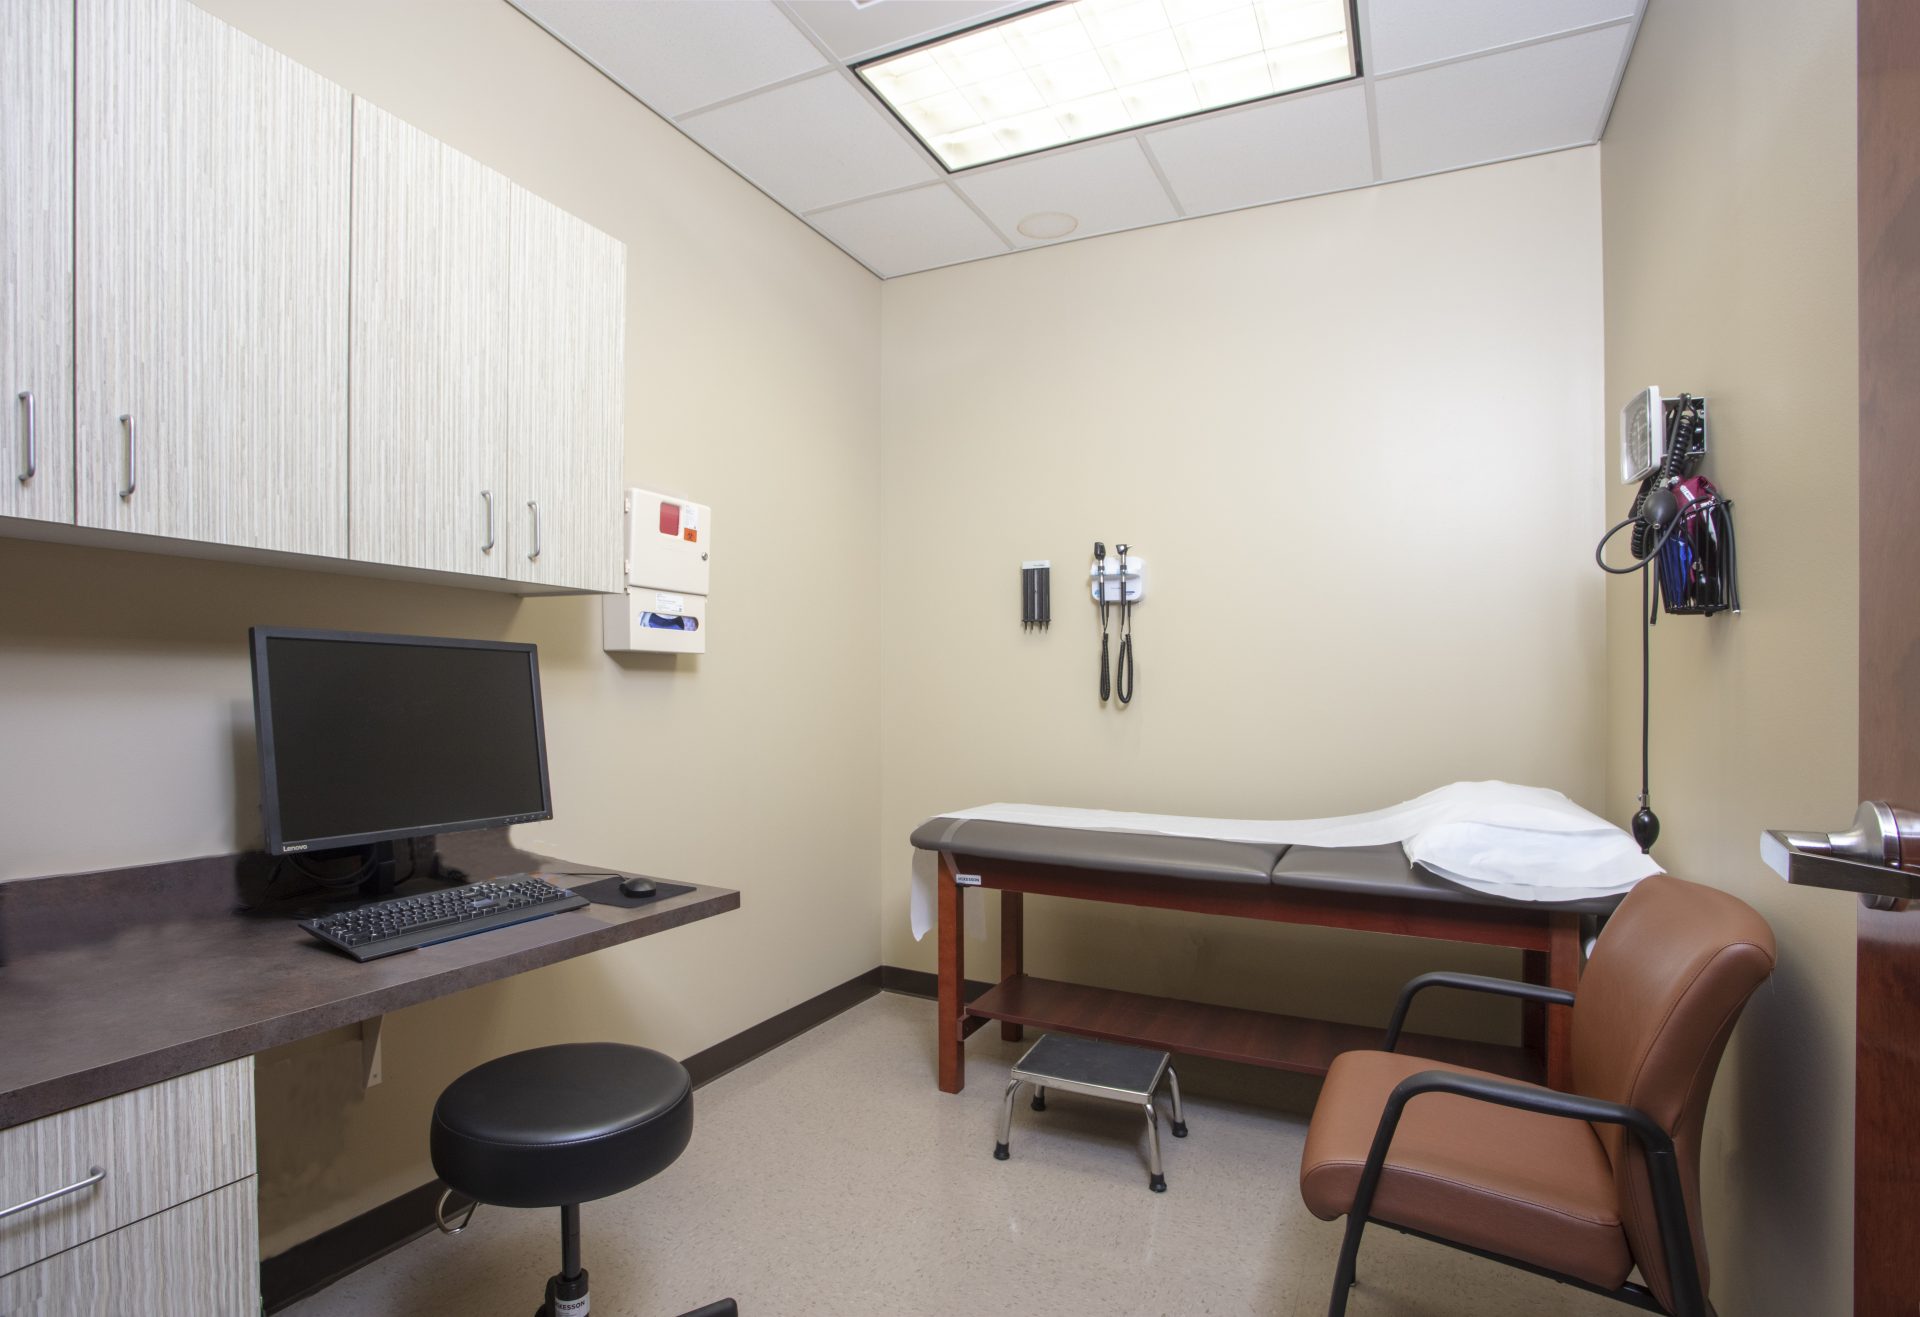 Exam room at the STEP-In Clinic